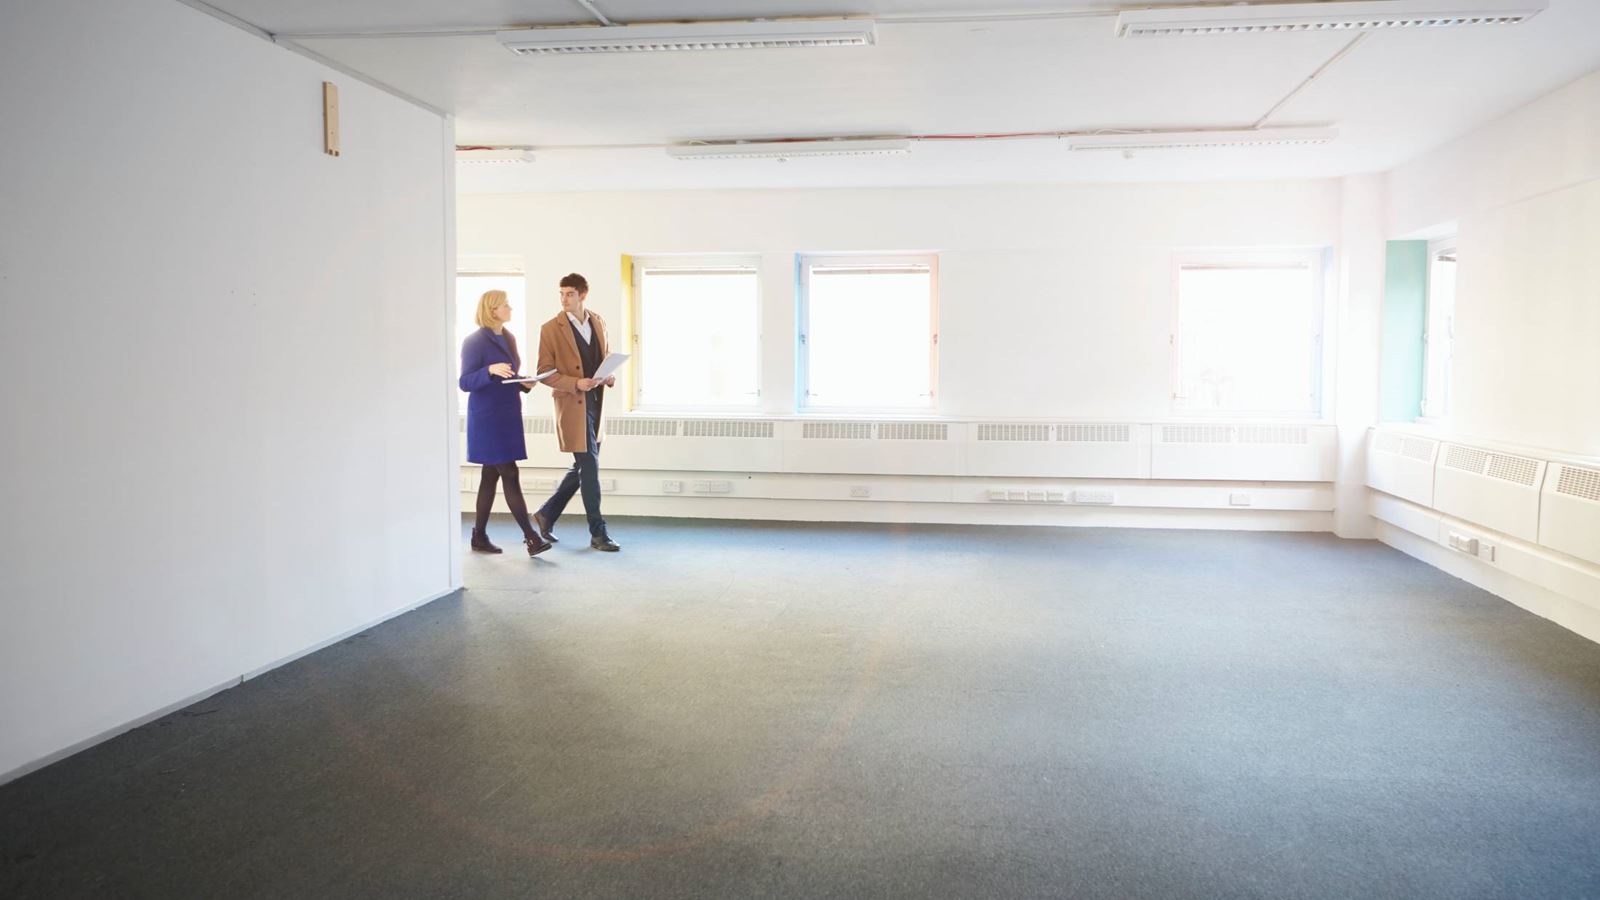 Two people walking around an empty building